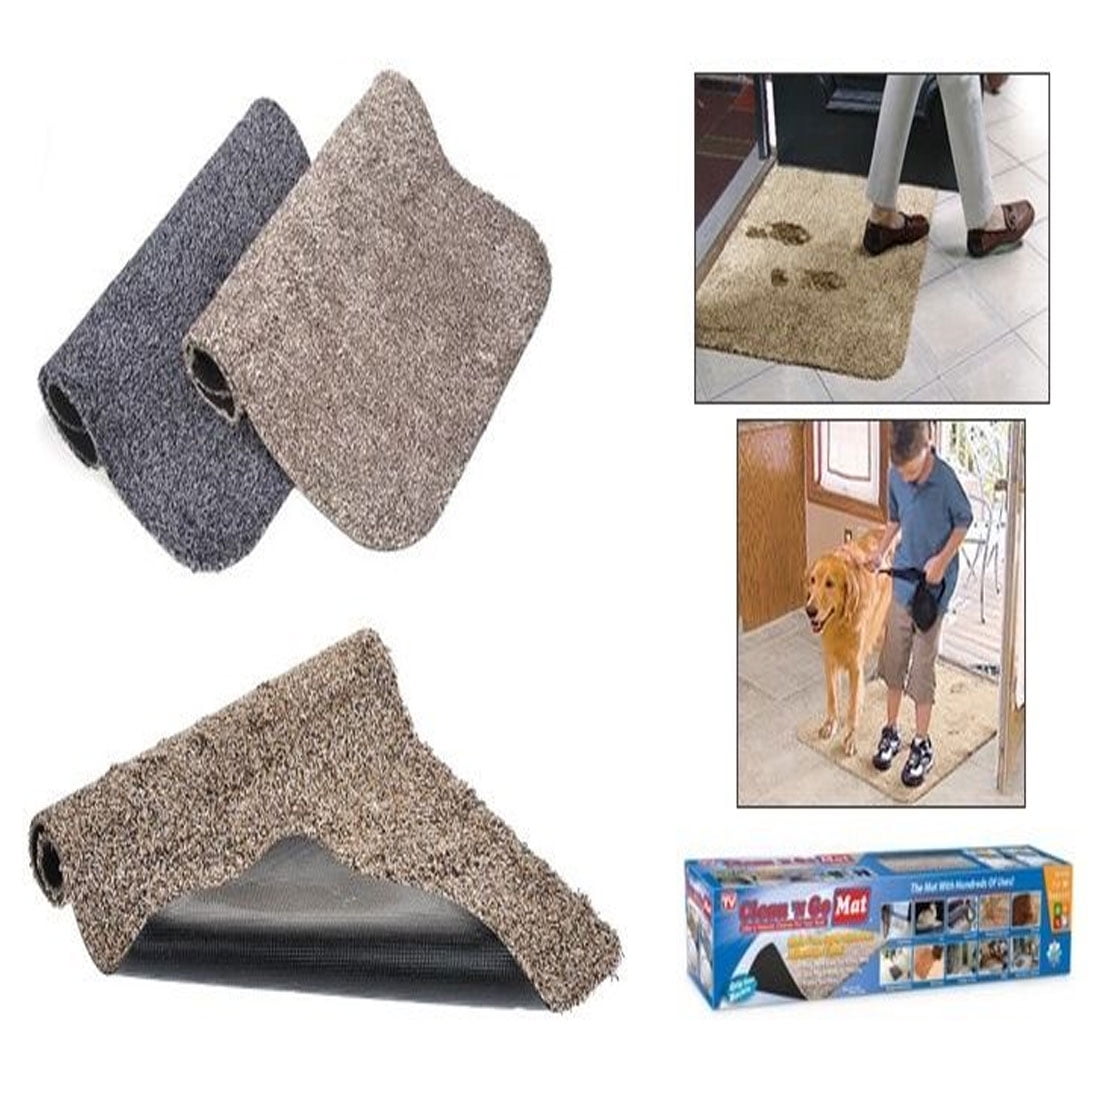  Muddy Mat AS-SEEN-ON-TV Highly Absorbent Microfiber